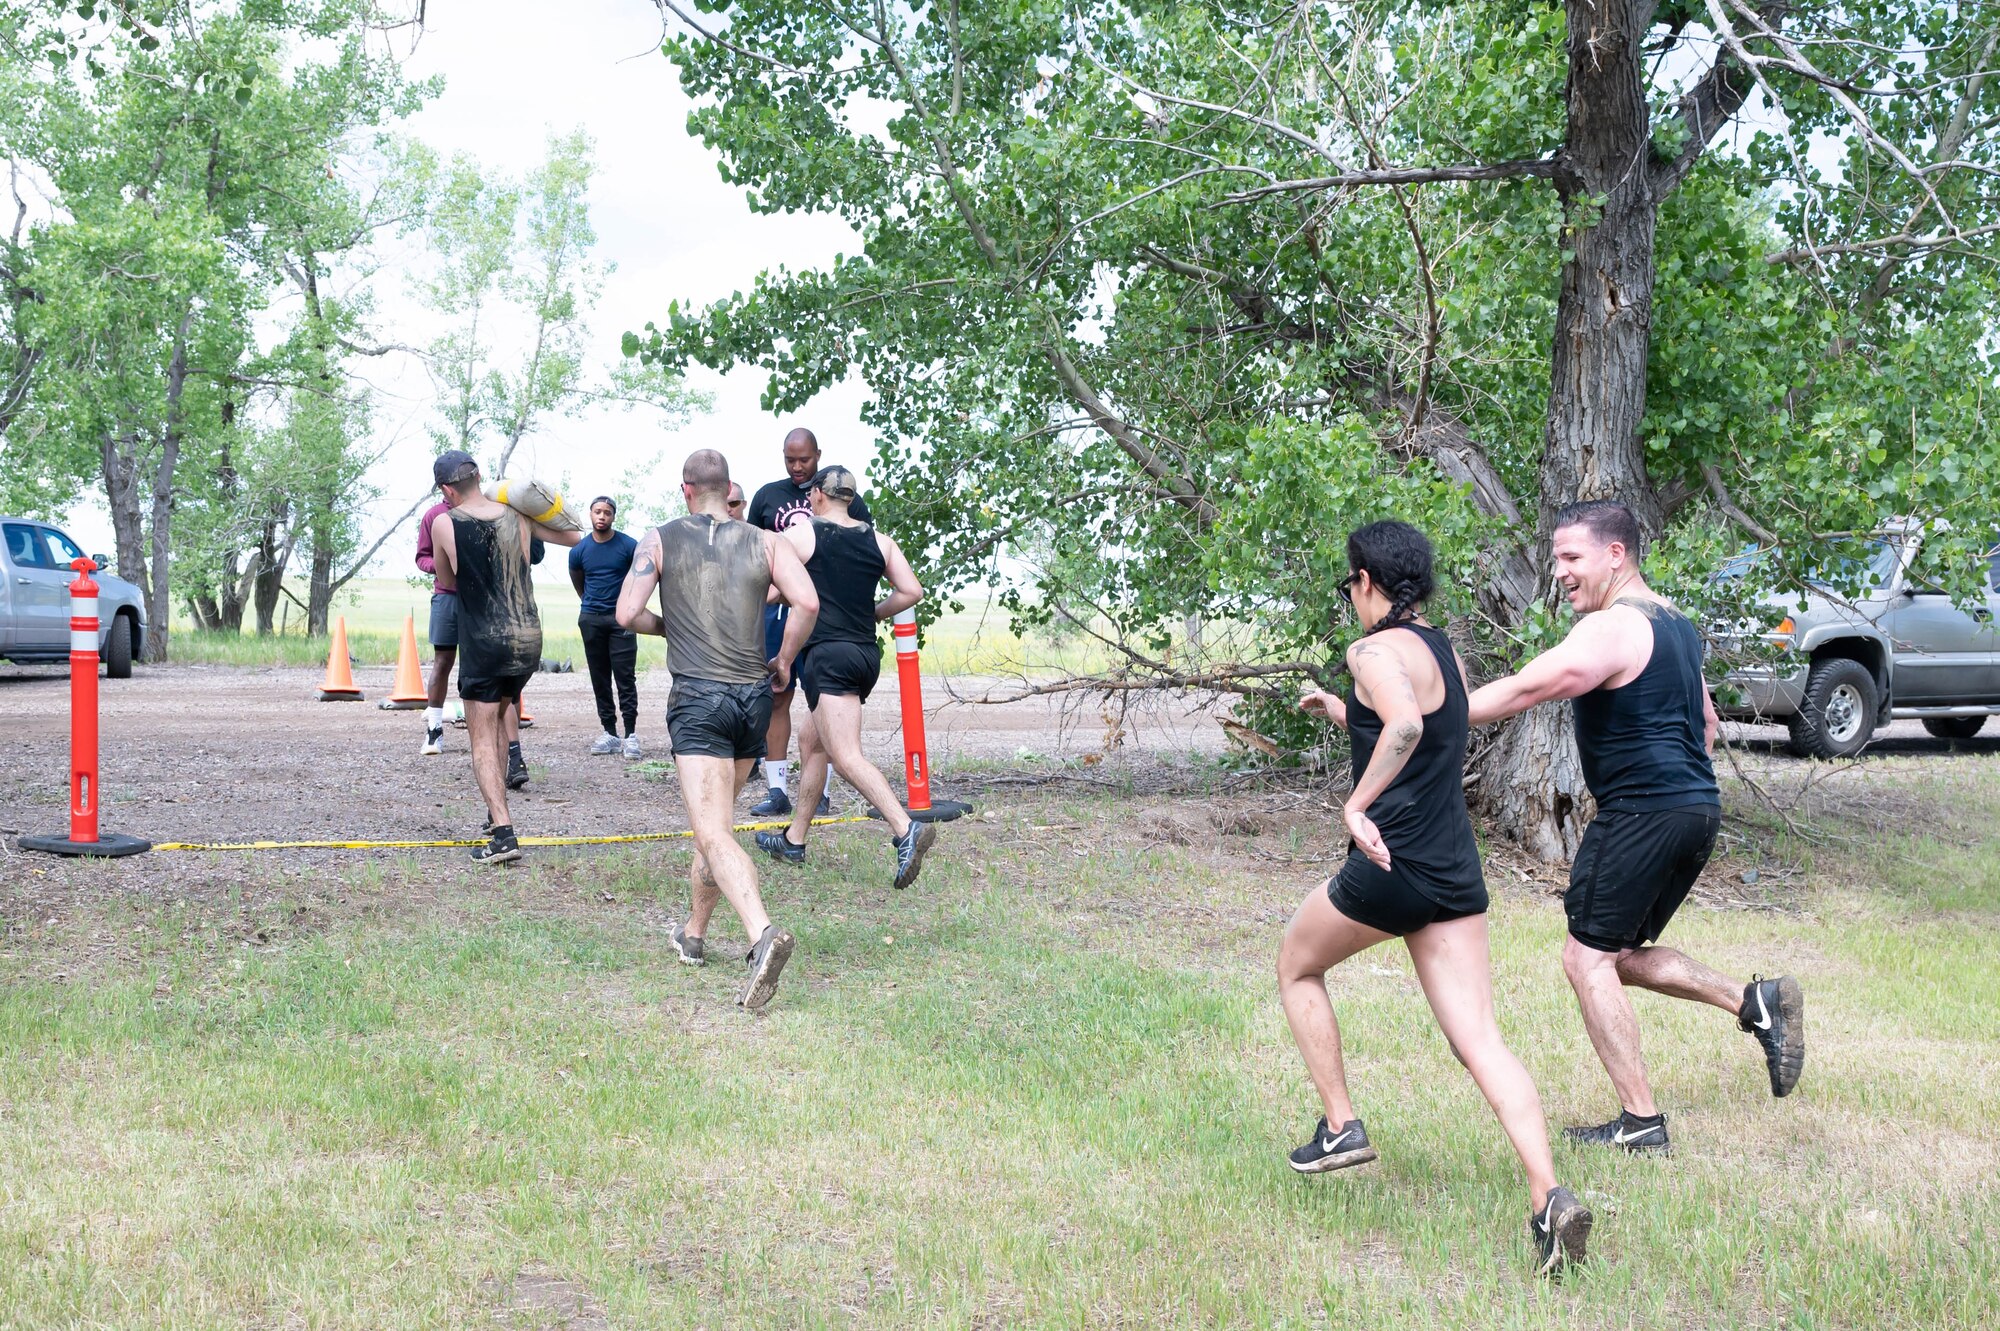 Members of the 341st Missile Wing cross the finish line during the Filthy Mudder race June 25, 2021, at Malmstrom Air Force Base, Mont.